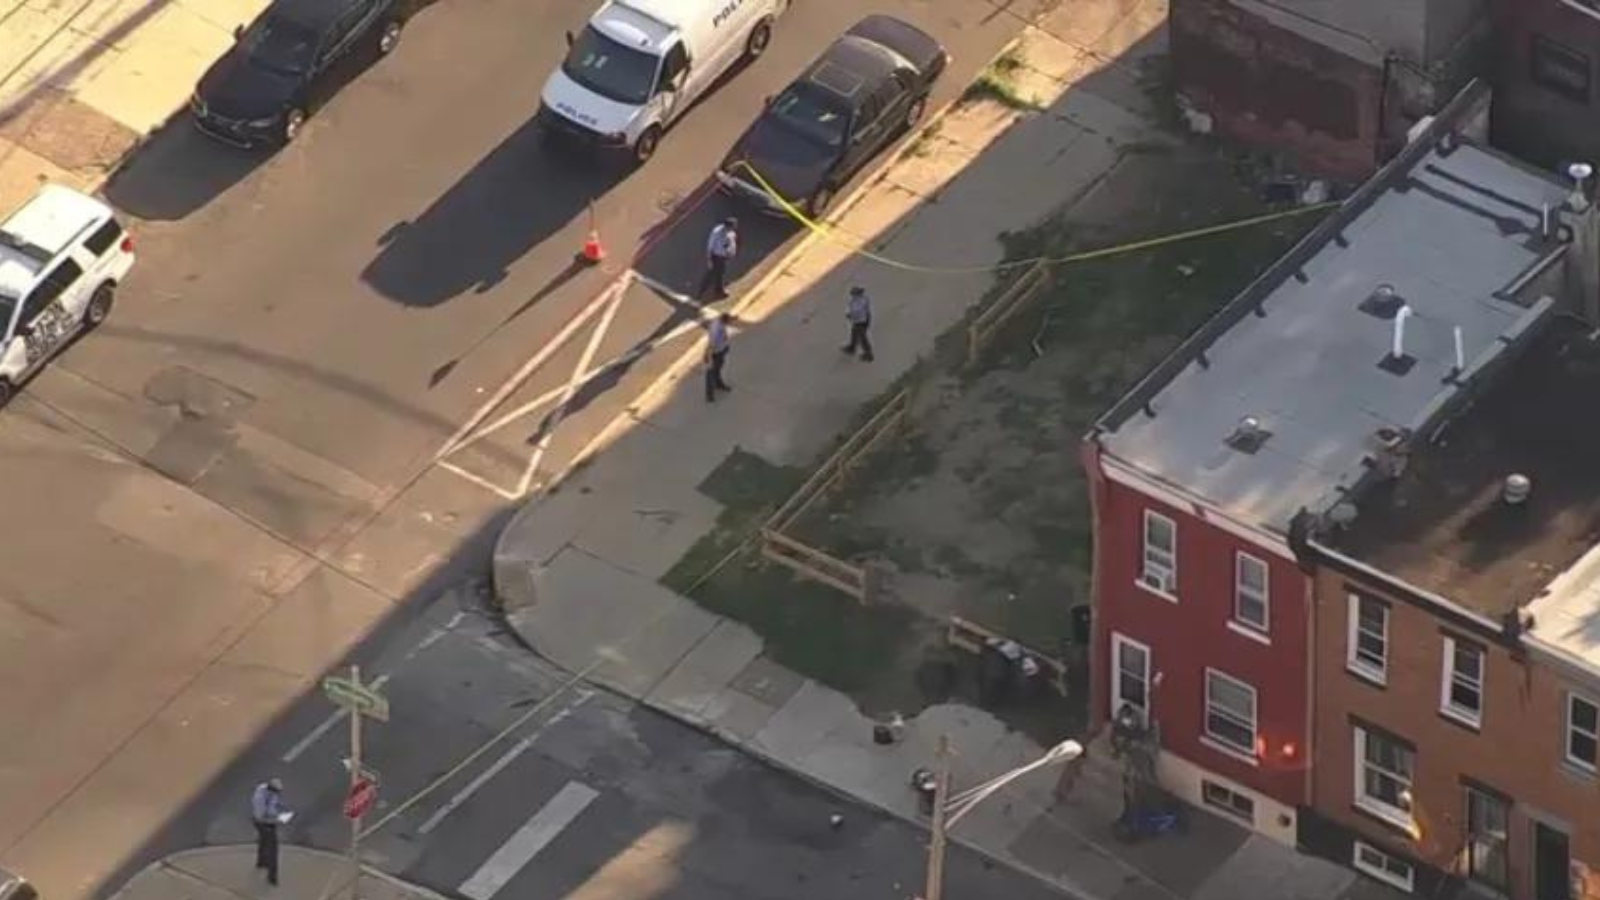 At least 6 injured in North Philly shooting